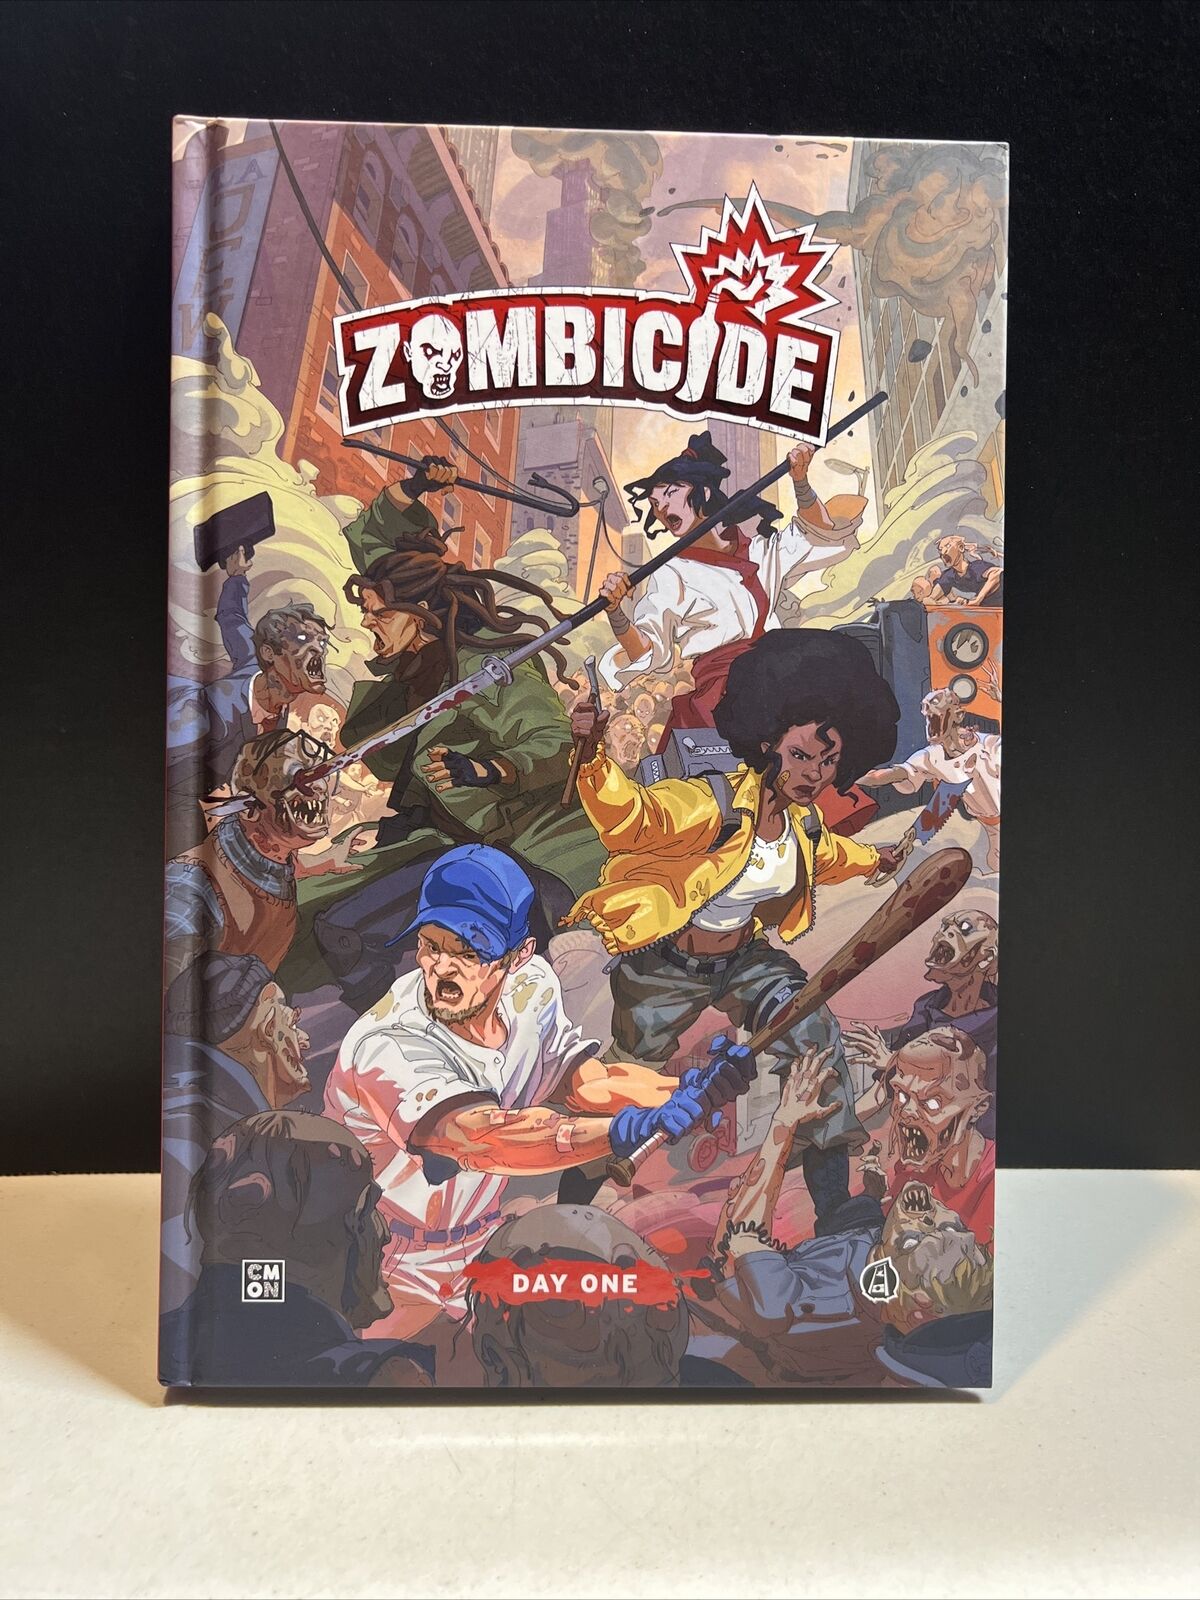 Zombicide Day One Hardcover Graphic Novel Comic Book CMON